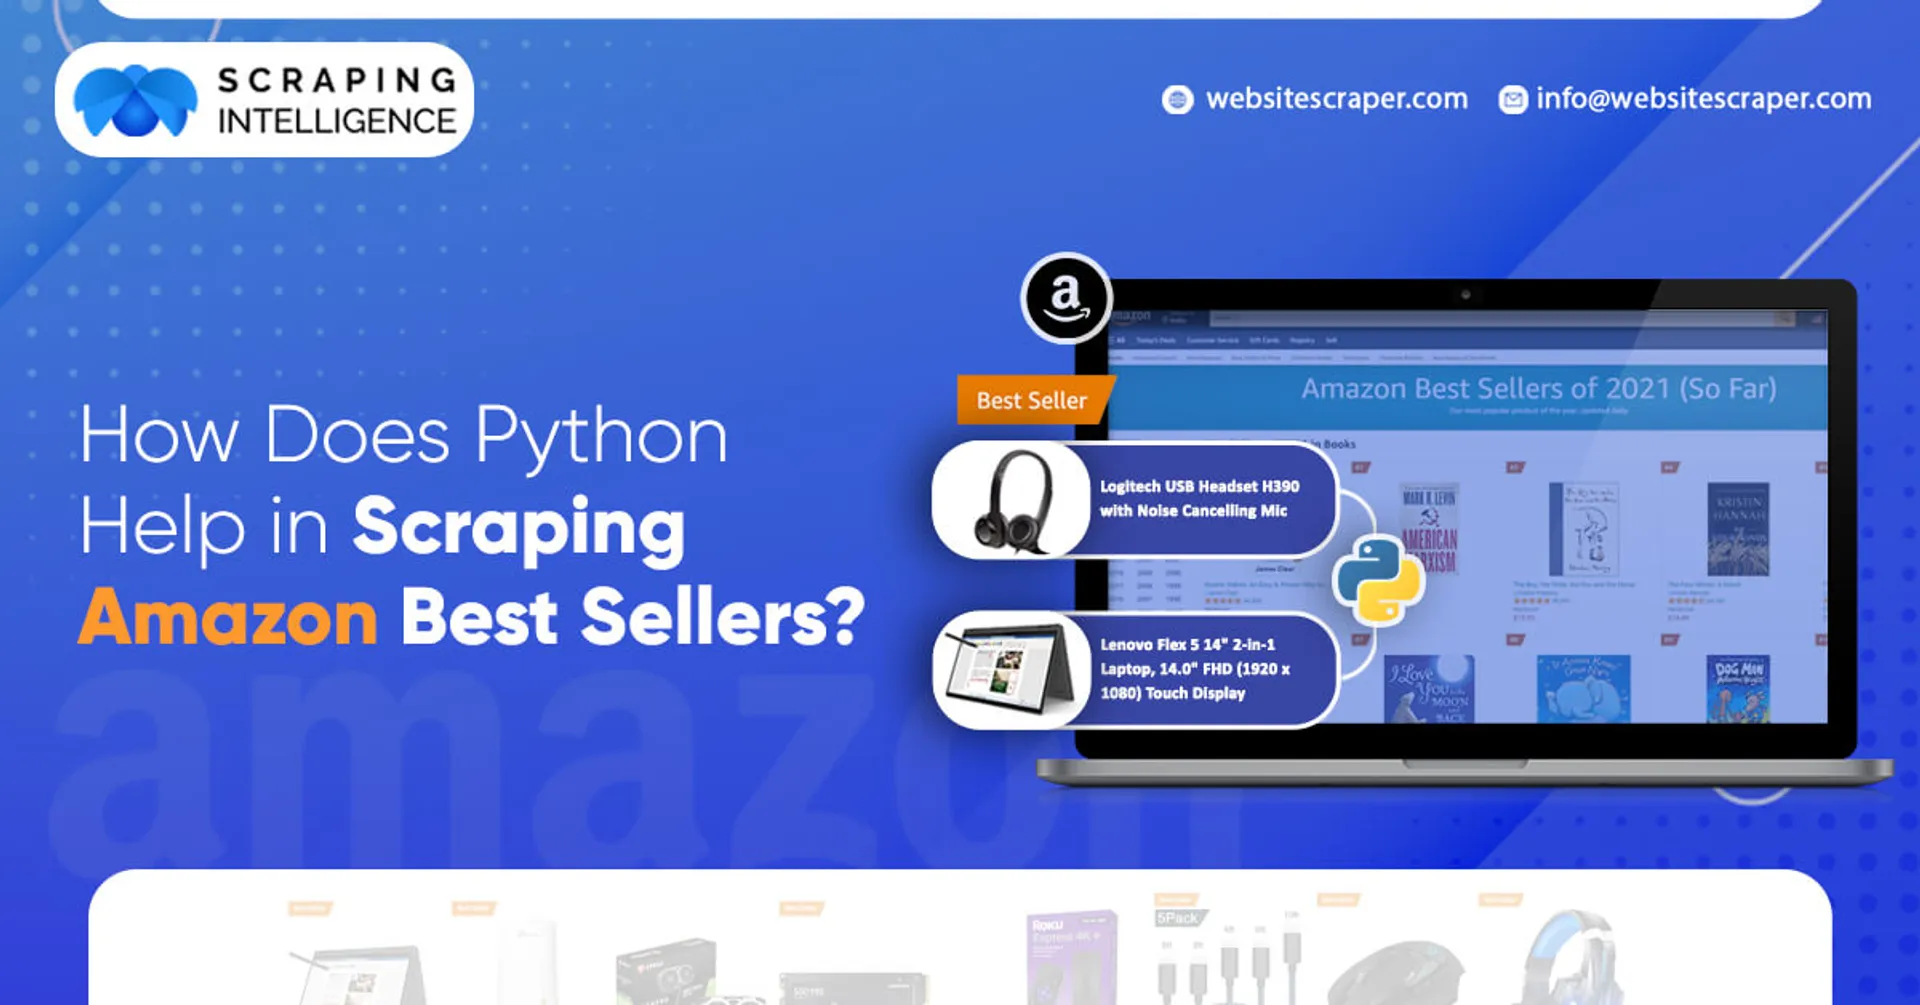 How Does Python Help In Scraping Amazon Best Sellers?

Hey there, fellow tech enthusiasts! Today, let's talk about the magic of Python and how it can help you effortlessly scrape Amazon Best Sellers data!  

Python, a popular and user-friendly programming language, provides an array of powerful libraries that make web scraping a breeze. When it comes to extracting information from Amazon's Best Sellers list, Python has got your back!

By coding a few Python characters, you can create web scraping applications to assist retailers in better product analysis. We all have an Amazon product page. This blog is specifically created to assist you in developing a simple and practical Python script to accomplish your scraping Amazon bestselling data aims.

Here's how Python comes to the rescue:

Beautiful Soup: Python's Beautiful Soup library is a true game-changer. It lets you parse HTML and XML documents easily, making it a perfect companion to navigate Amazon's Best Sellers web page and scrape valuable data.

Requests: The 'Requests' library in Python simplifies process of sending HTTP requests and handling responses. It helps you fetch the content of Amazon Best Sellers' web page so you can extract the juicy details.

Selenium: Sometimes, web pages are dynamically generated using JavaScript, which can be tricky for simple web scrapers. But fear not! Python's Selenium library allows you to interact with the page just like a human user, enabling you to access the dynamic content effortlessly.

Data Analysis: Python offers powerful data analysis libraries like Pandas, it a breeze to organize, clean, and analyze the scraped data. You can easily create insightful visualizations to gain deeper insights into the Best Sellers trends.

Avoid Anti-Scraping Mechanisms: Python provides ways to avoid being detected as a scraper by Amazon's anti-scraping mechanisms. You can add headers, use proxies, or implement delays to make your scraper act like a polite and human user.

Remember, while web scraping is a handy technique, it's essential to be mindful of Amazon's terms of service and scraping policies. Always scrape responsibly and avoid overloading their servers.

So, what are you waiting for? Embrace the power of Python and start exploring Amazon Best Sellers like a pro! The possibilities are endless, and who knows, you might discover some hidden gems amidst the top sellers! 

#Python #WebScraping #AmazonBestSellers #TechMagic

Read More- https://www.websitescraper.com/how-does-python-help-in-scraping-amazon-best-sellers.php